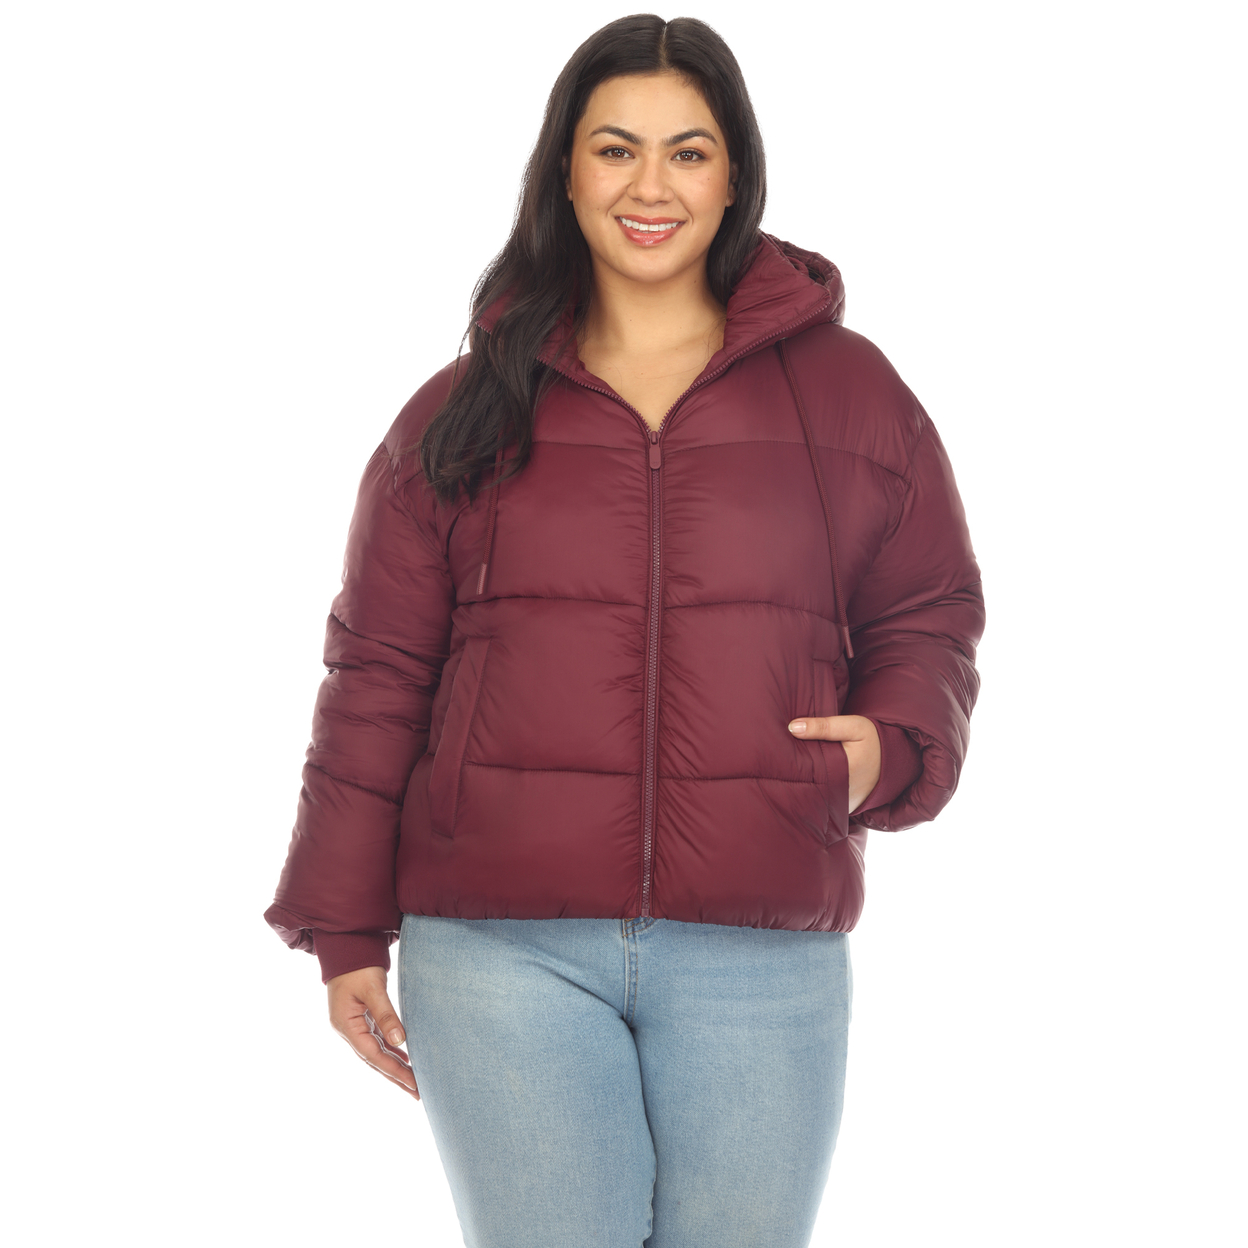 White Mark Women's Zip Hooded Puffer Jacket With Pockets - Burgundy, 3x